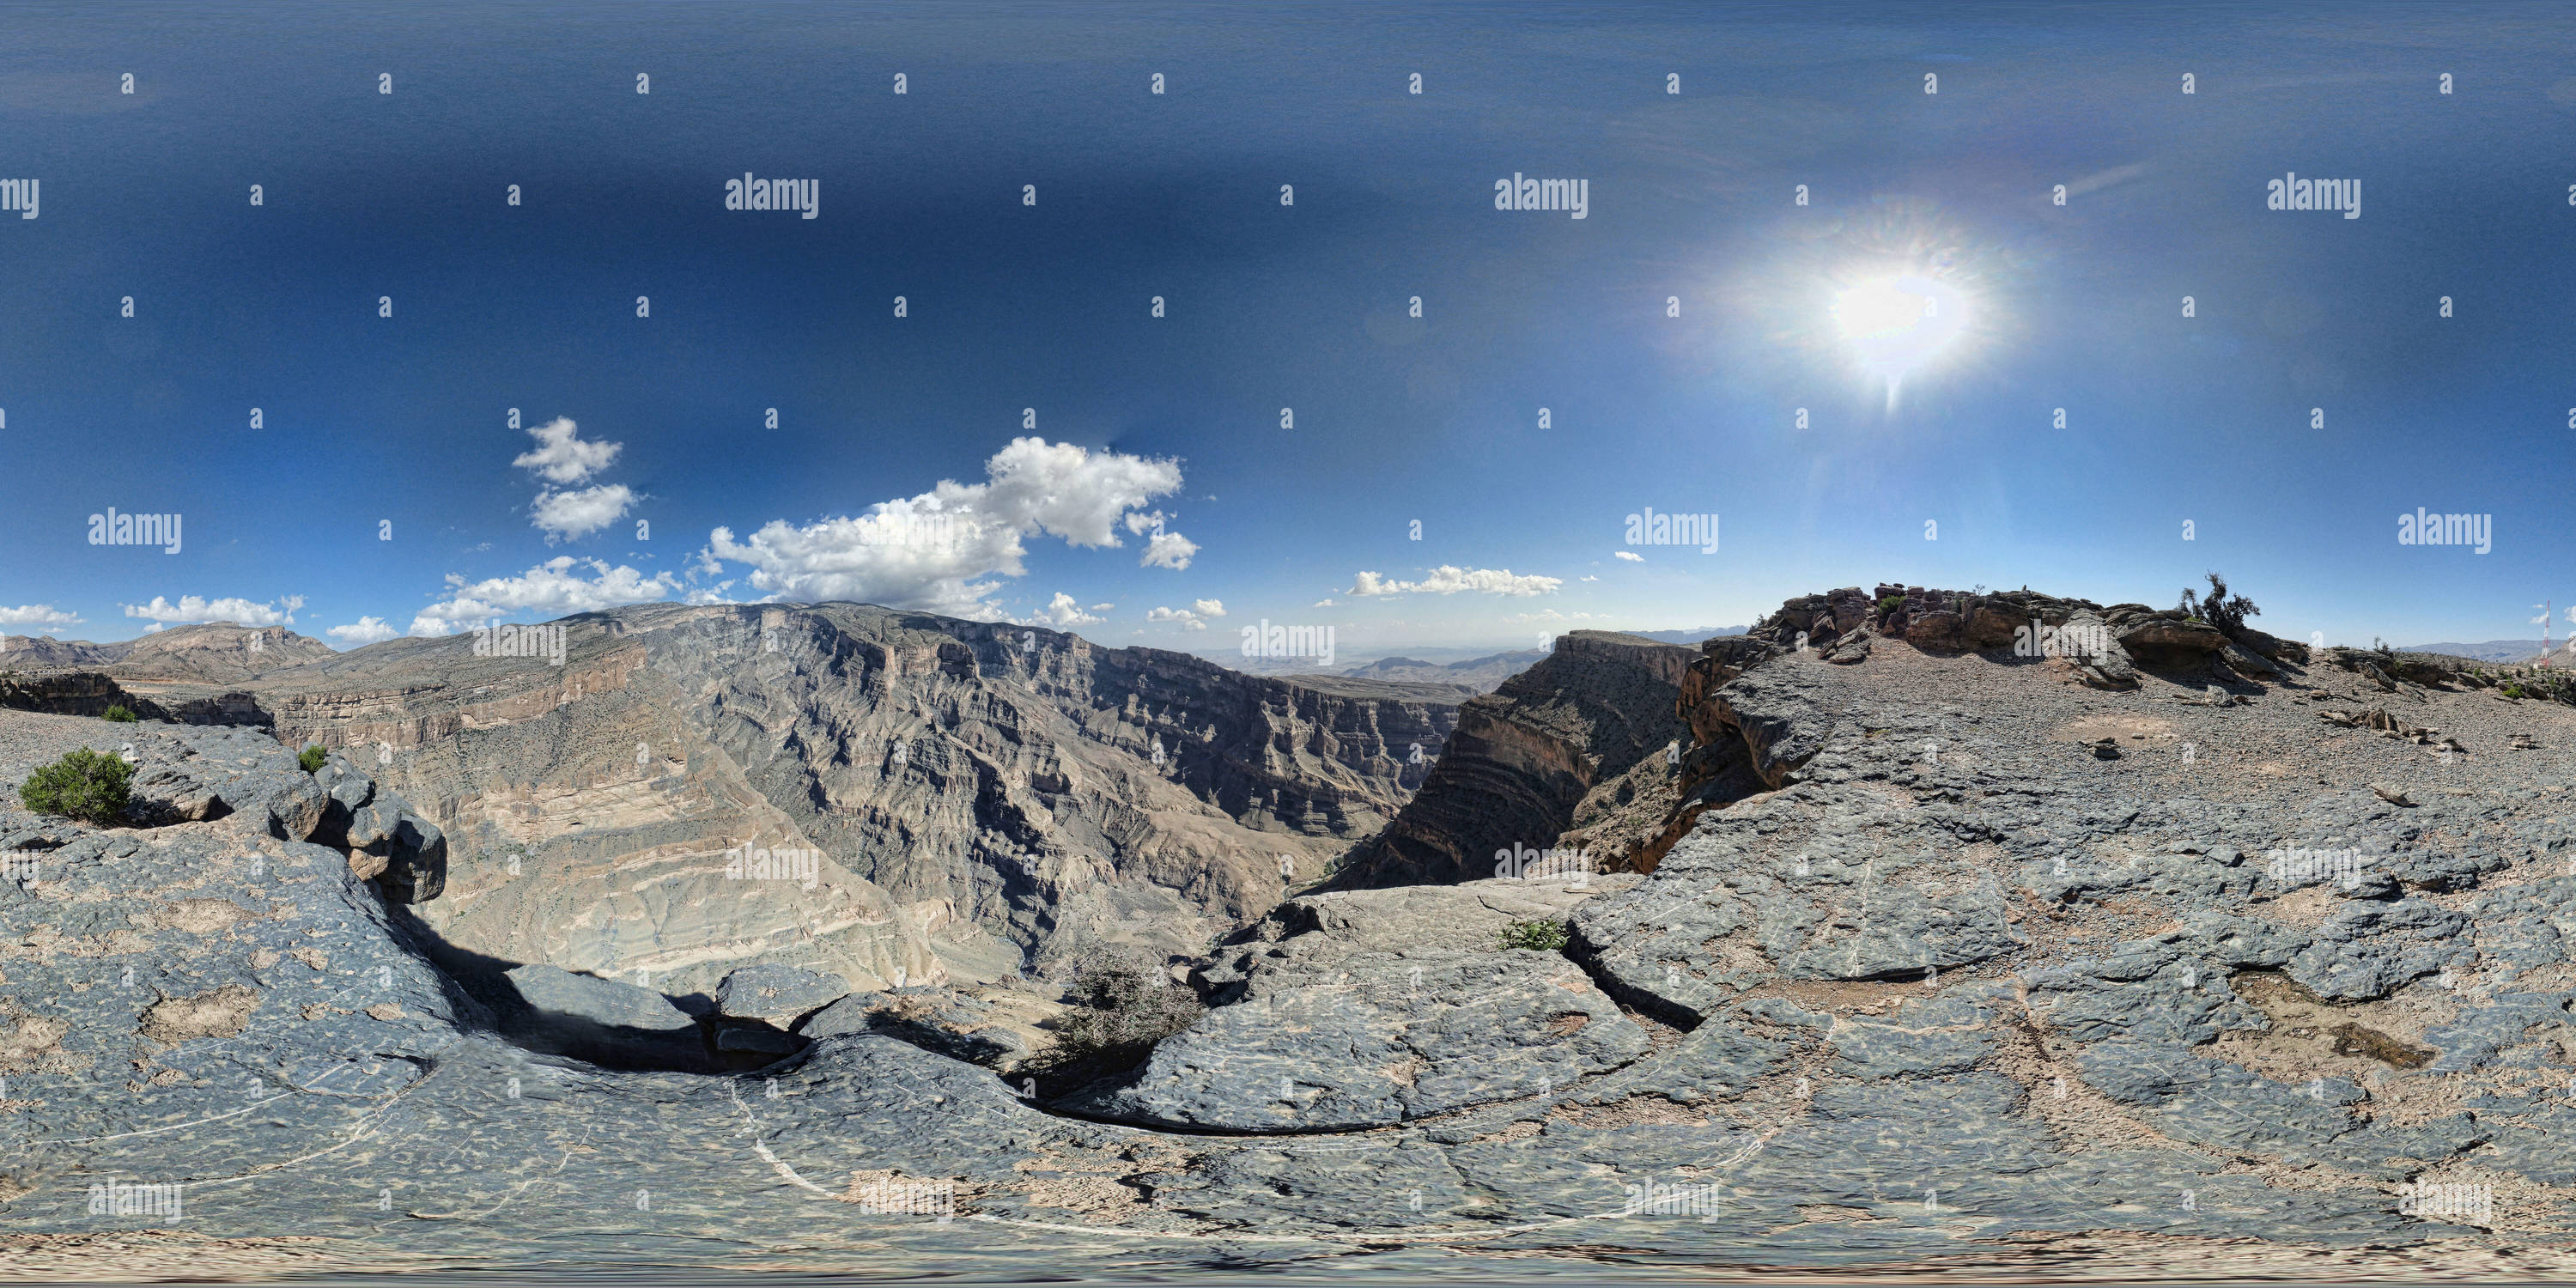 360 degree panoramic view of Jebel Shams, Oman - 'Grand Canyon of the Middle East'